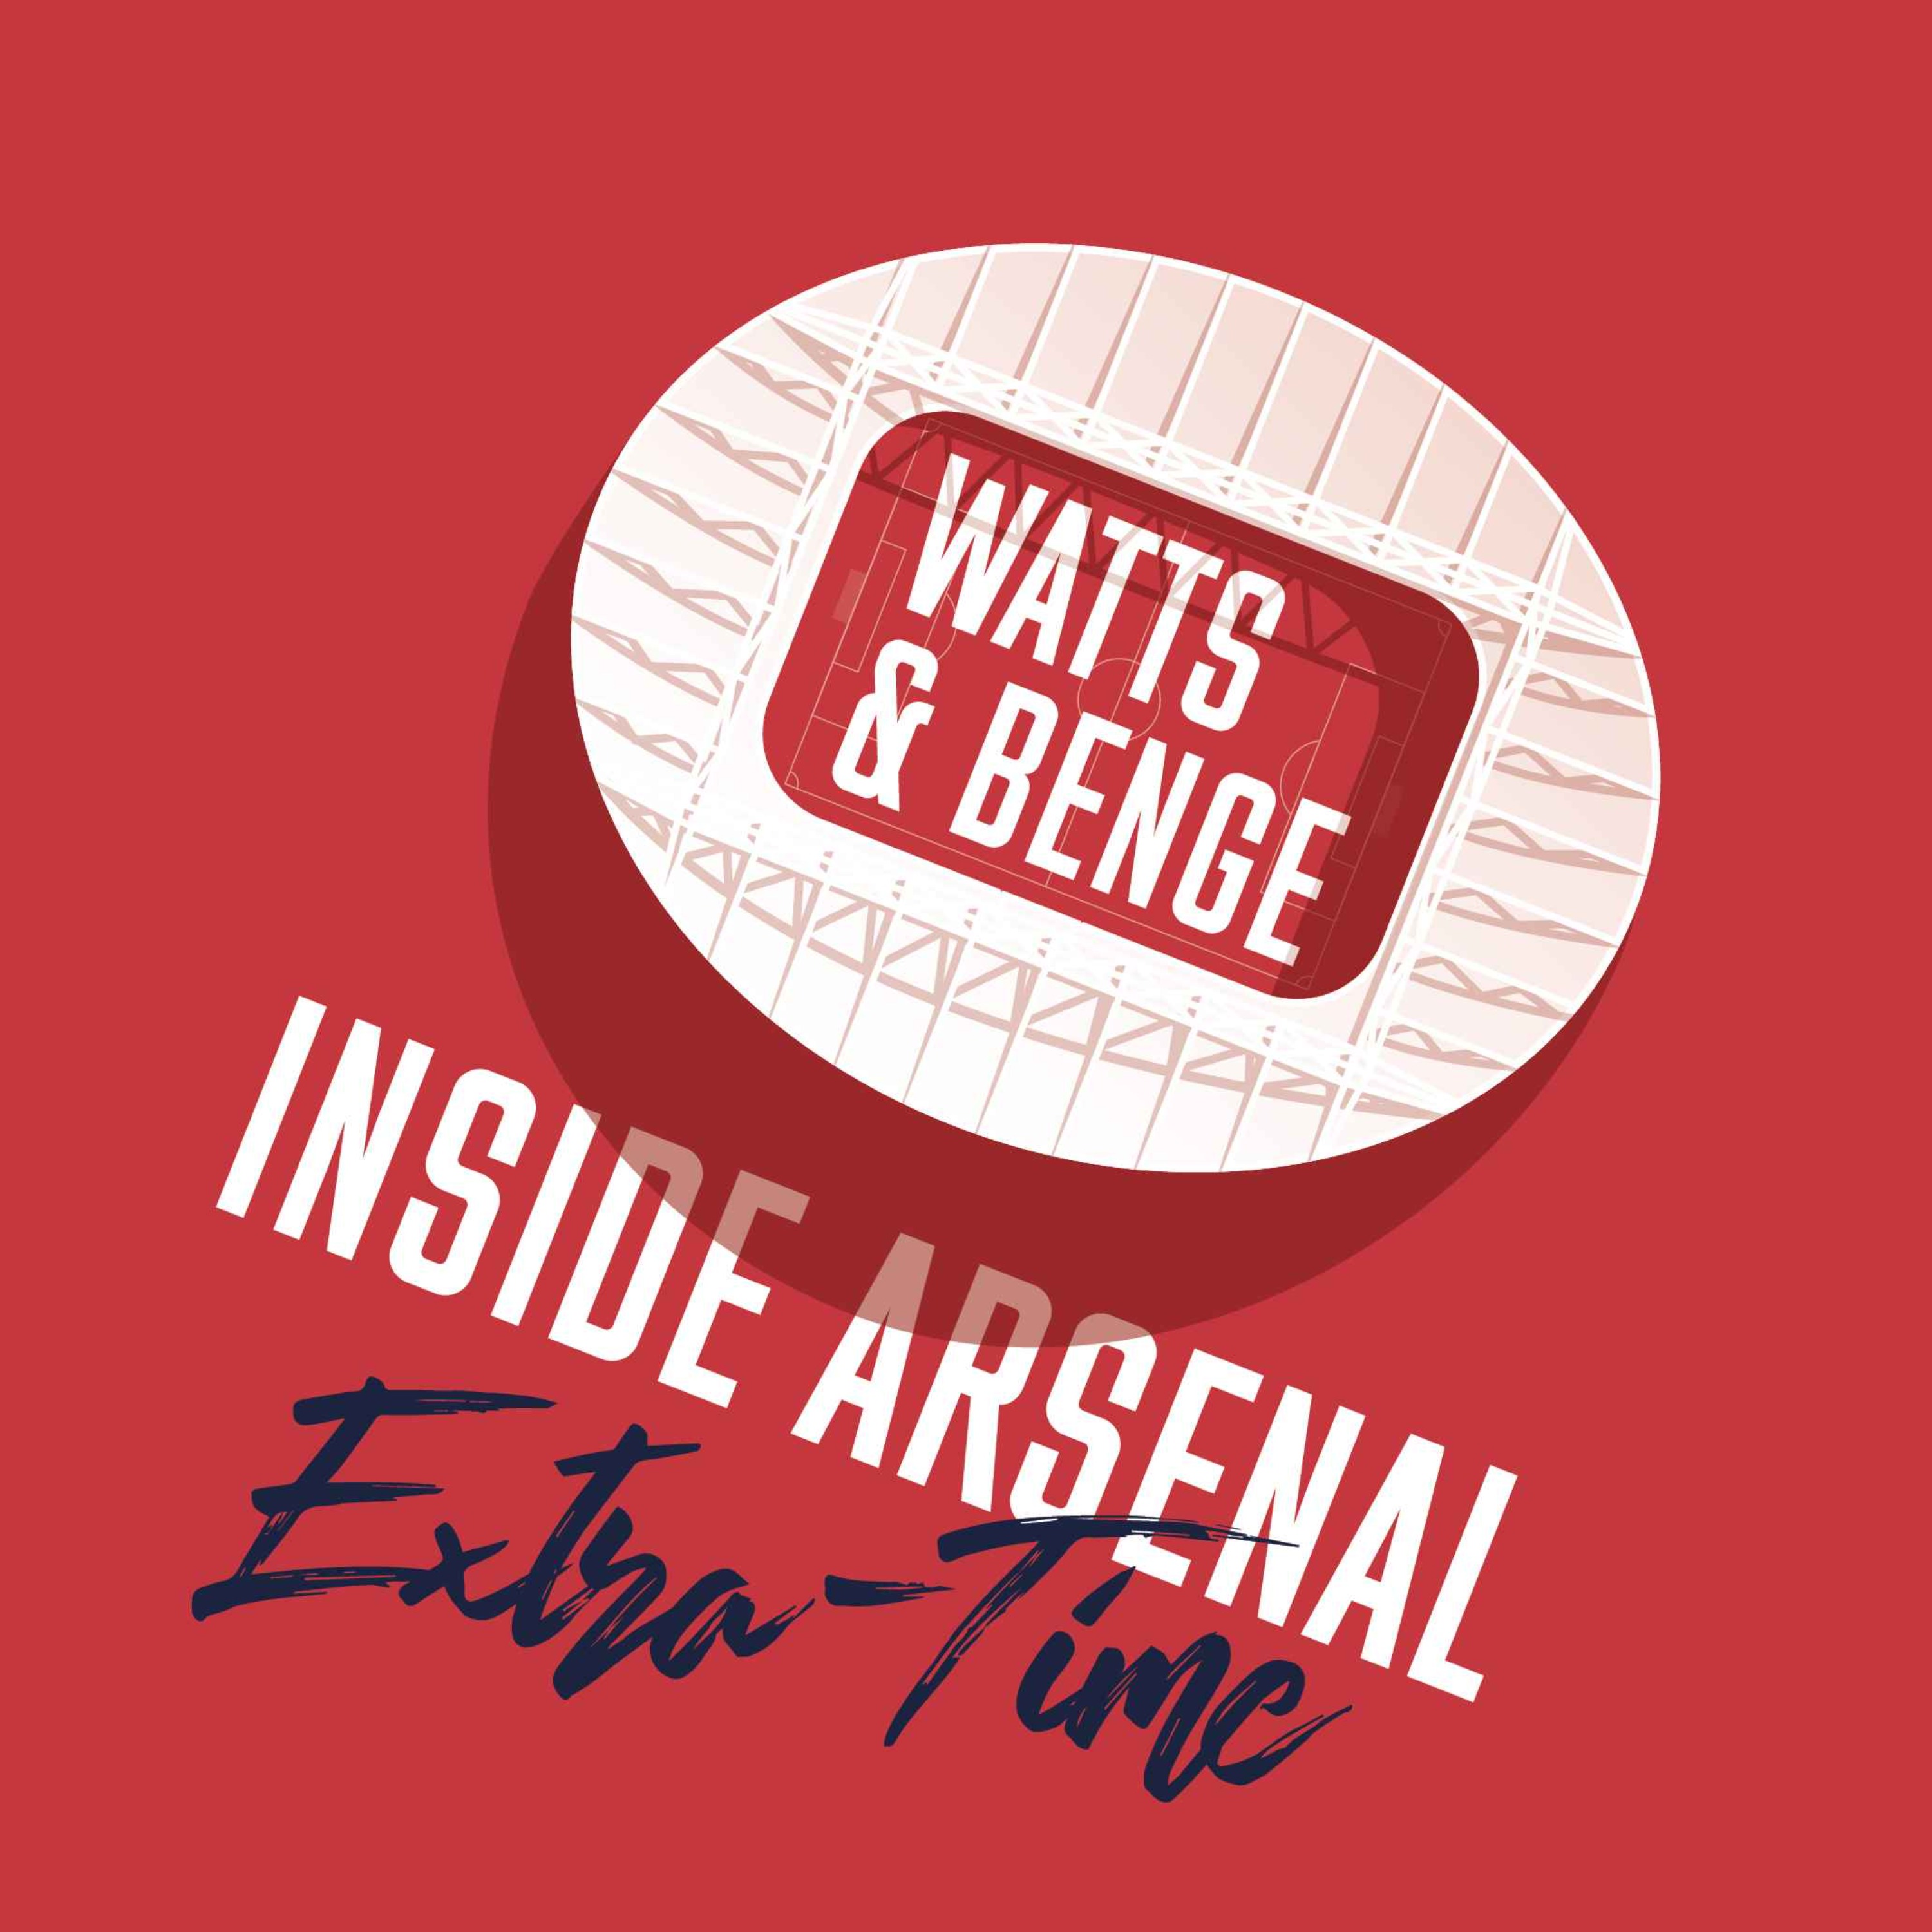 Extra-time with James Benge - Arteta's 'big' Partey concern | West Ham preview and Rice's return